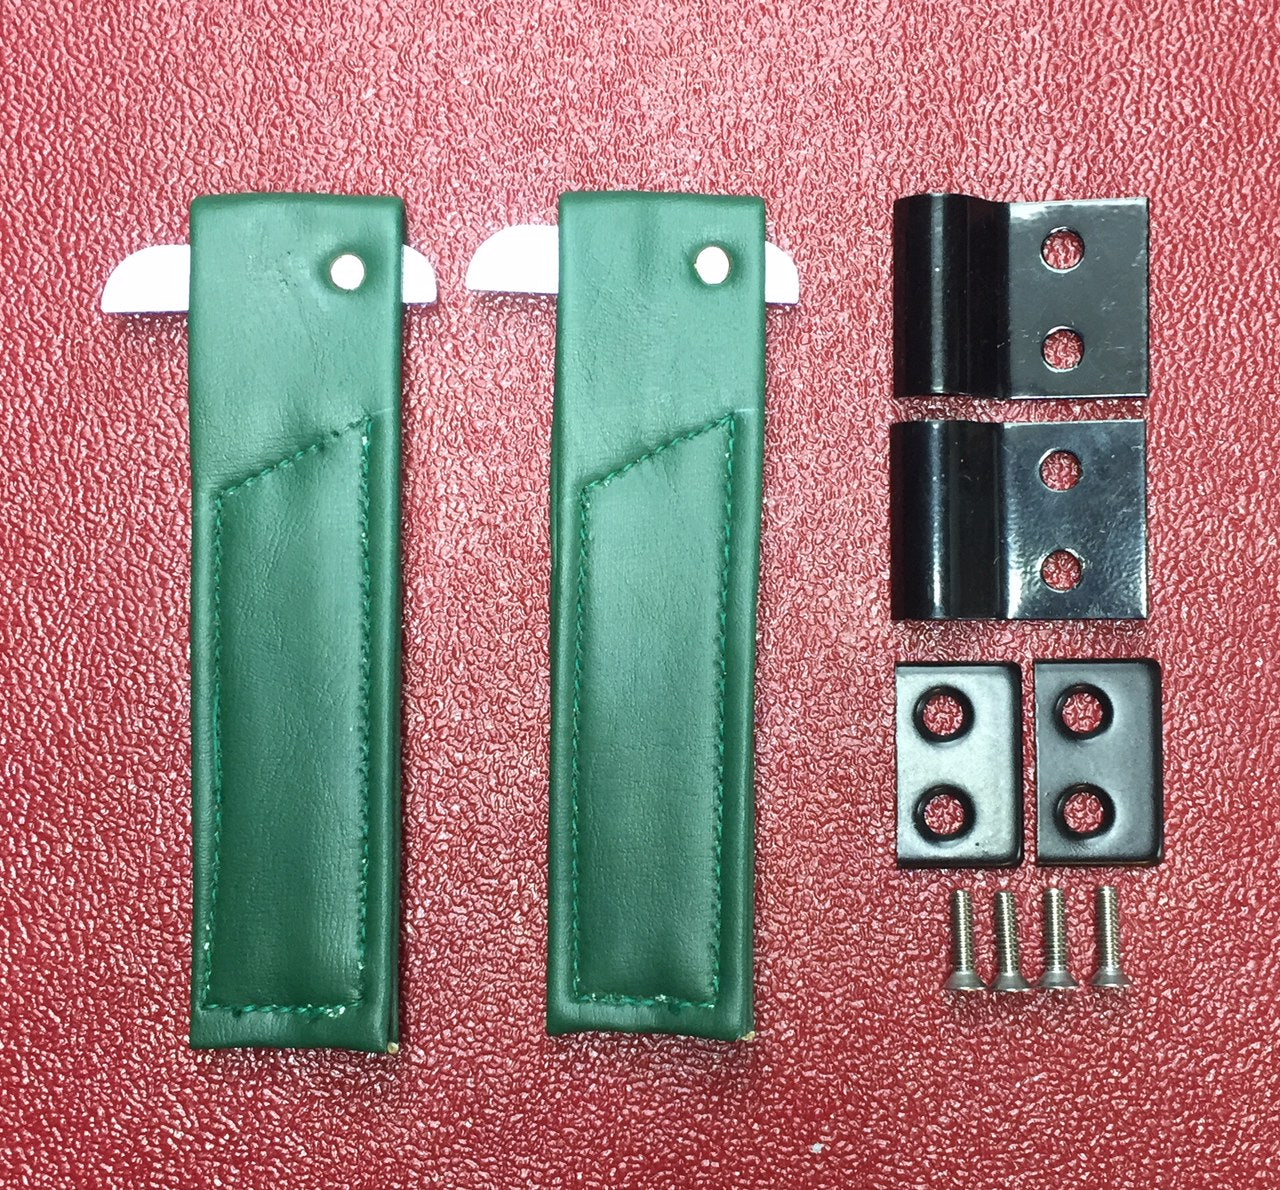 Austin Healey Sprite Door check strap kit with hardware (sold as a pair) Interior - Bugeye